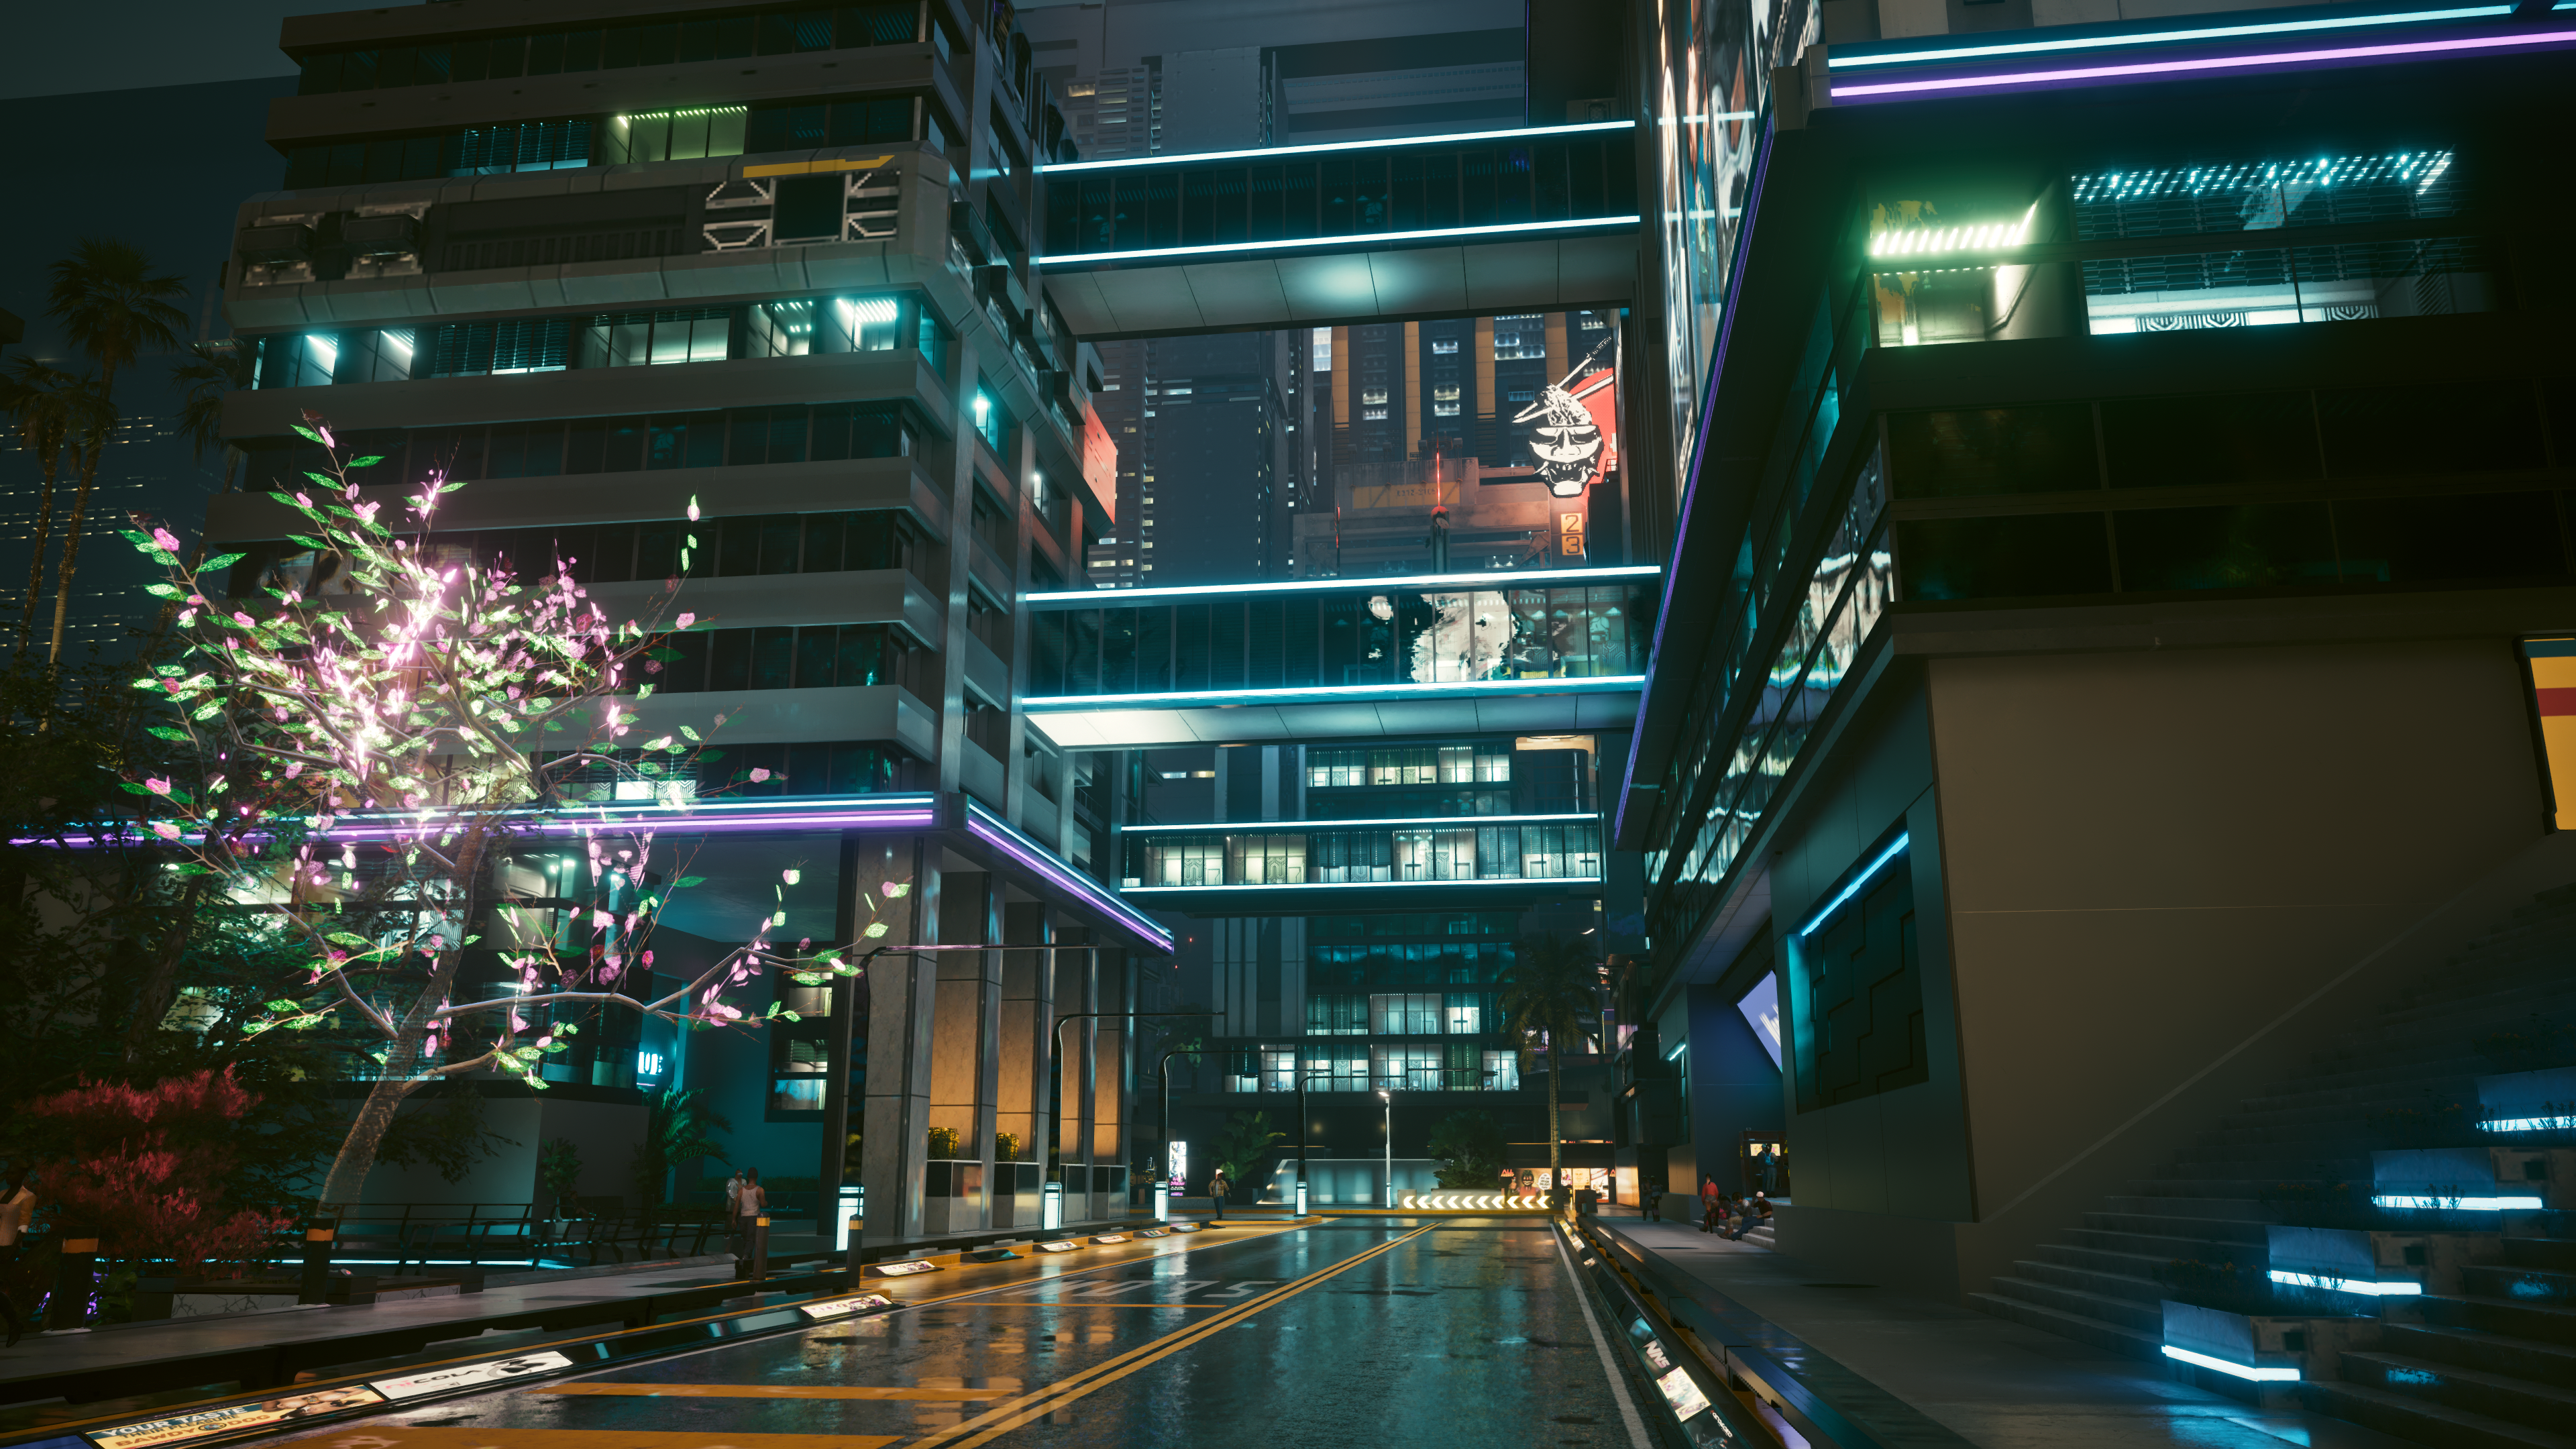 Cyberpunk 2077: Incredible Screenshots With Ray Tracing: Overdrive Mode, GeForce News